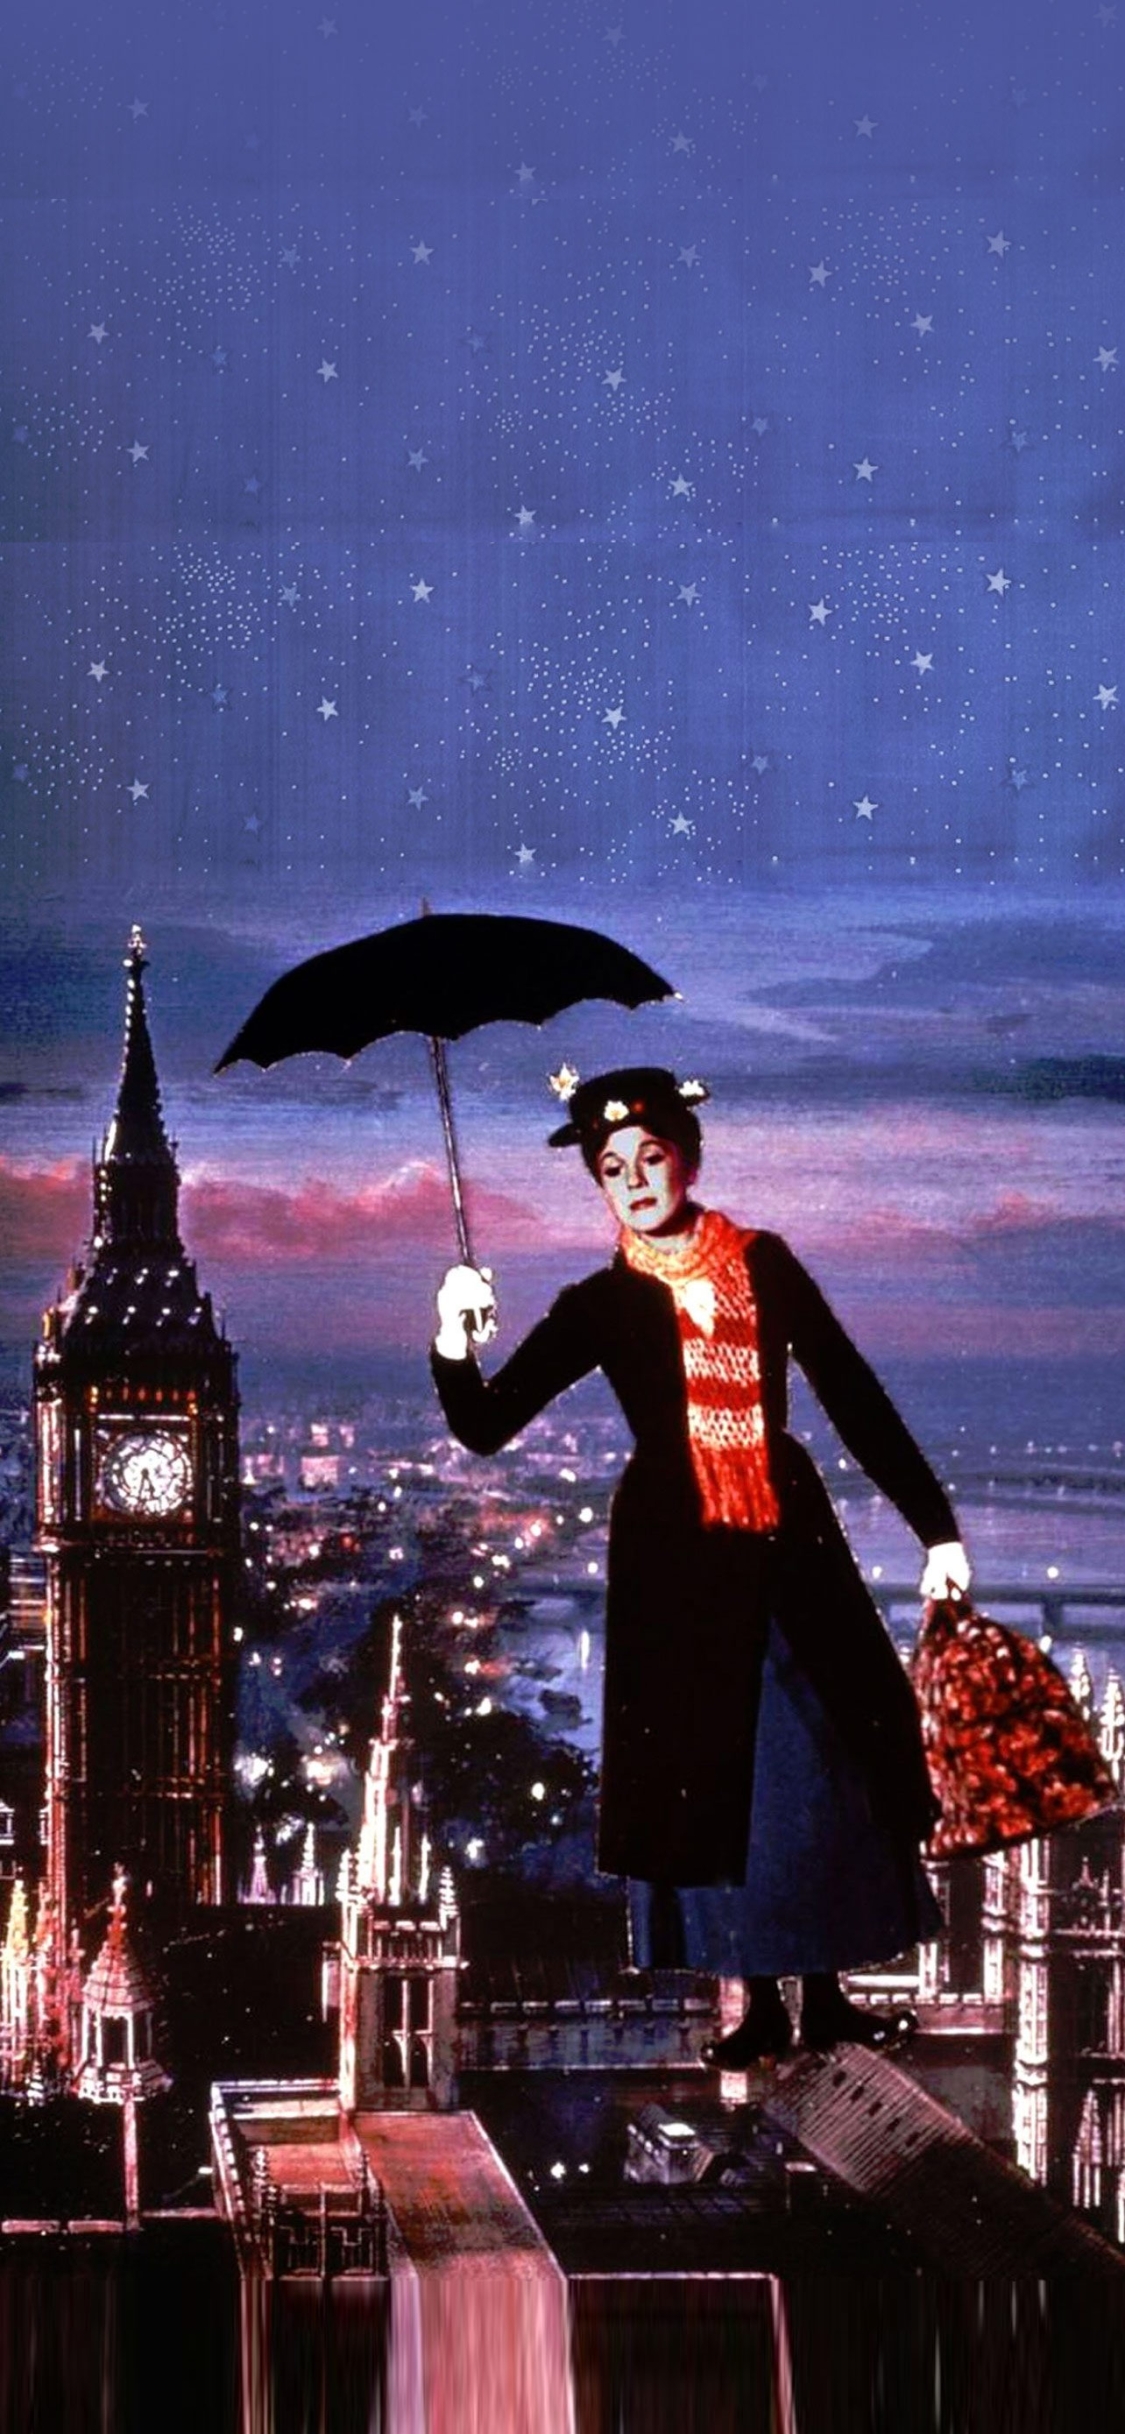 phone wallpaper displaying disney (mary poppins)